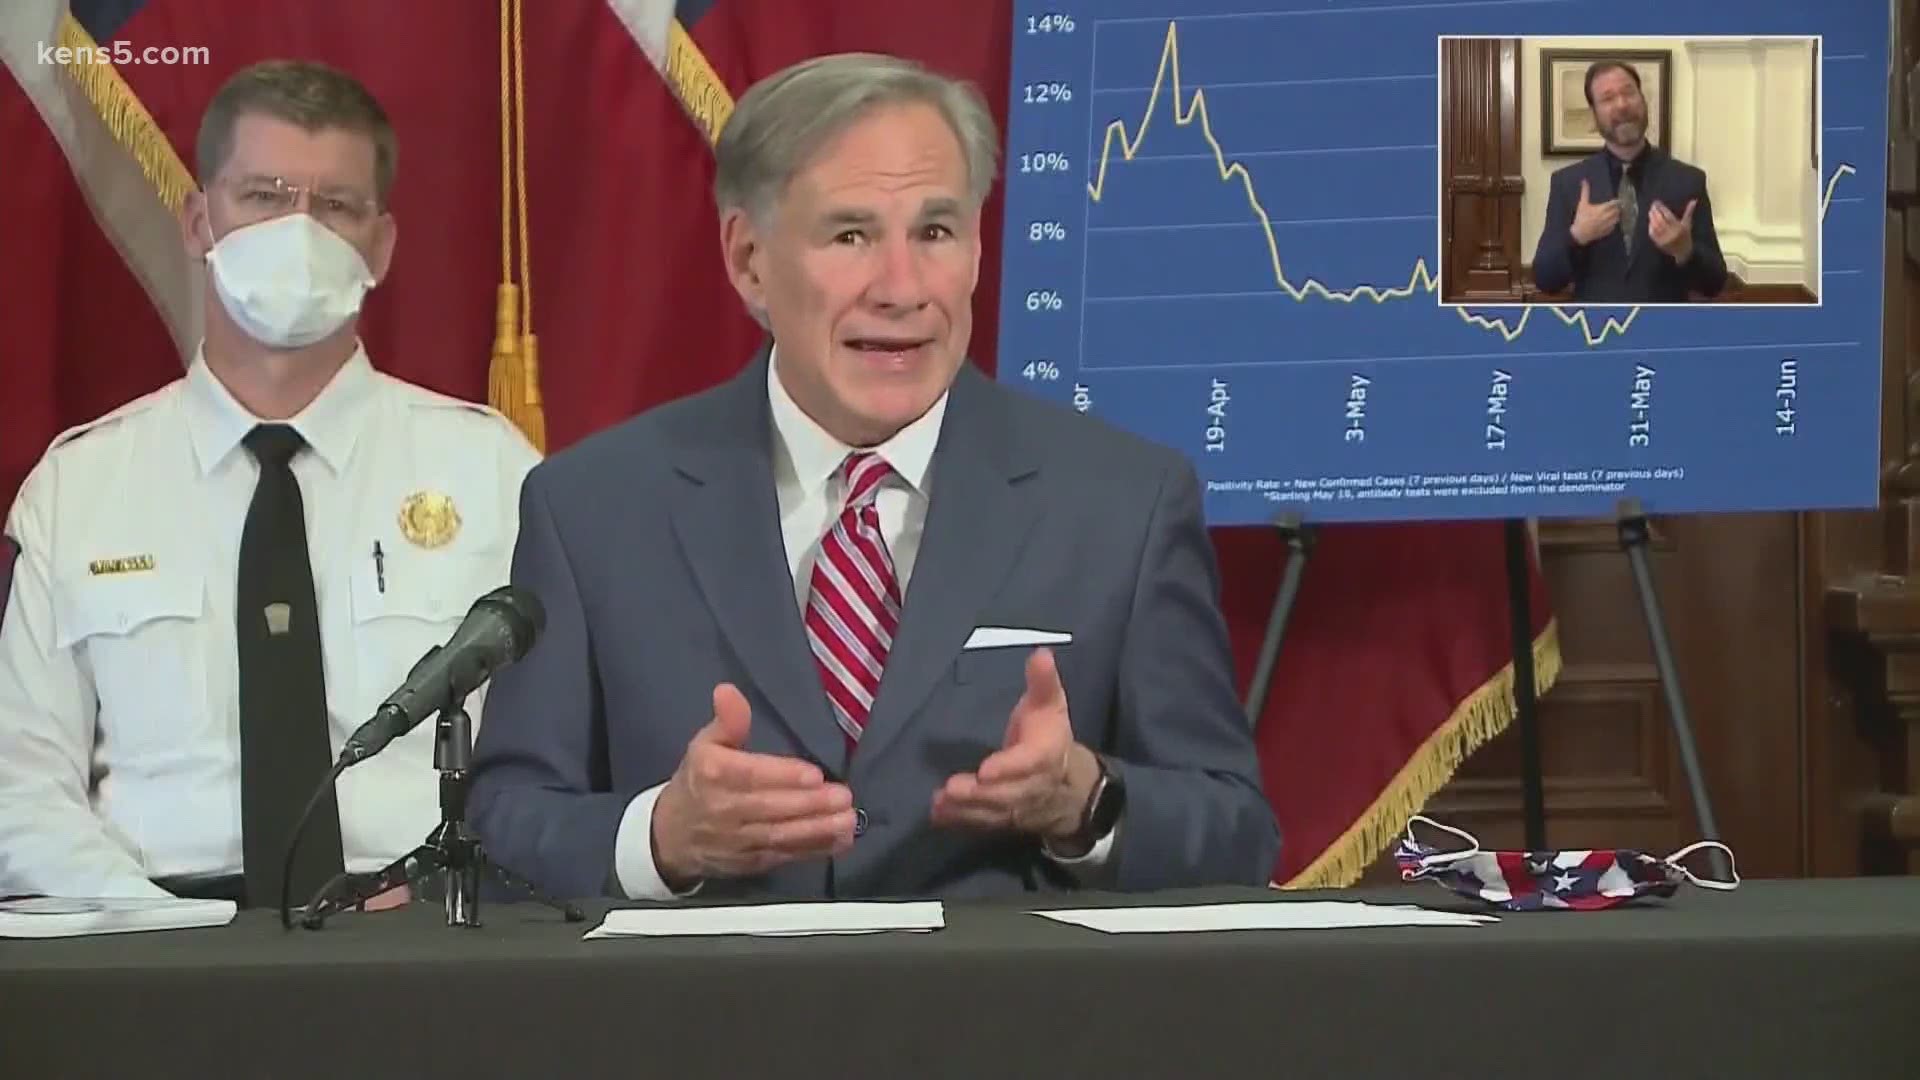 Gov. Abbott will visit San Antonio to provide an update on personal protective equipment in Texas and deliver remarks at the Texas Division of Emergency Management.